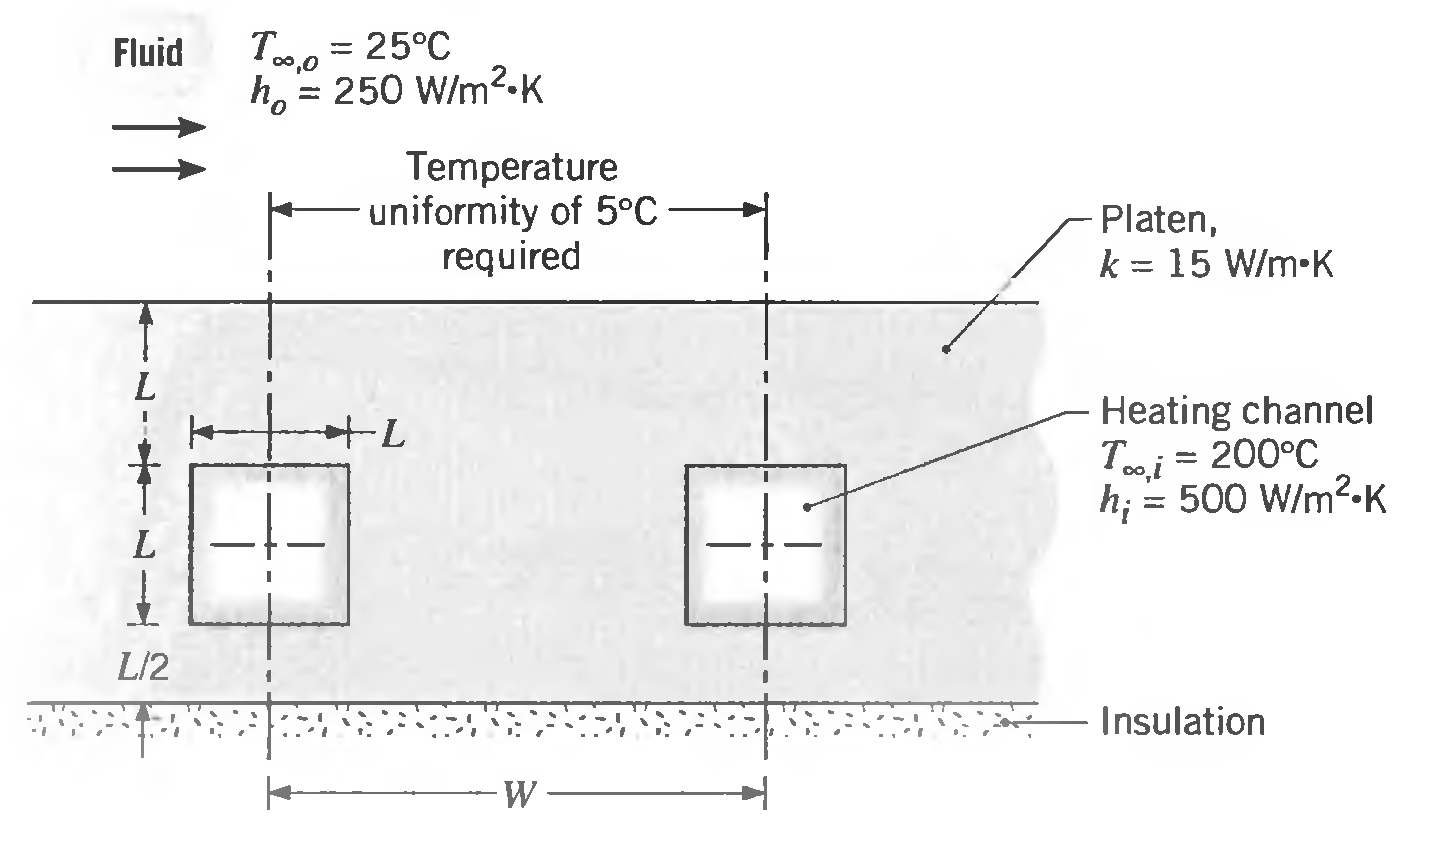 A platen of thermal conductivity k = 15 W/m ∙ K is heated 